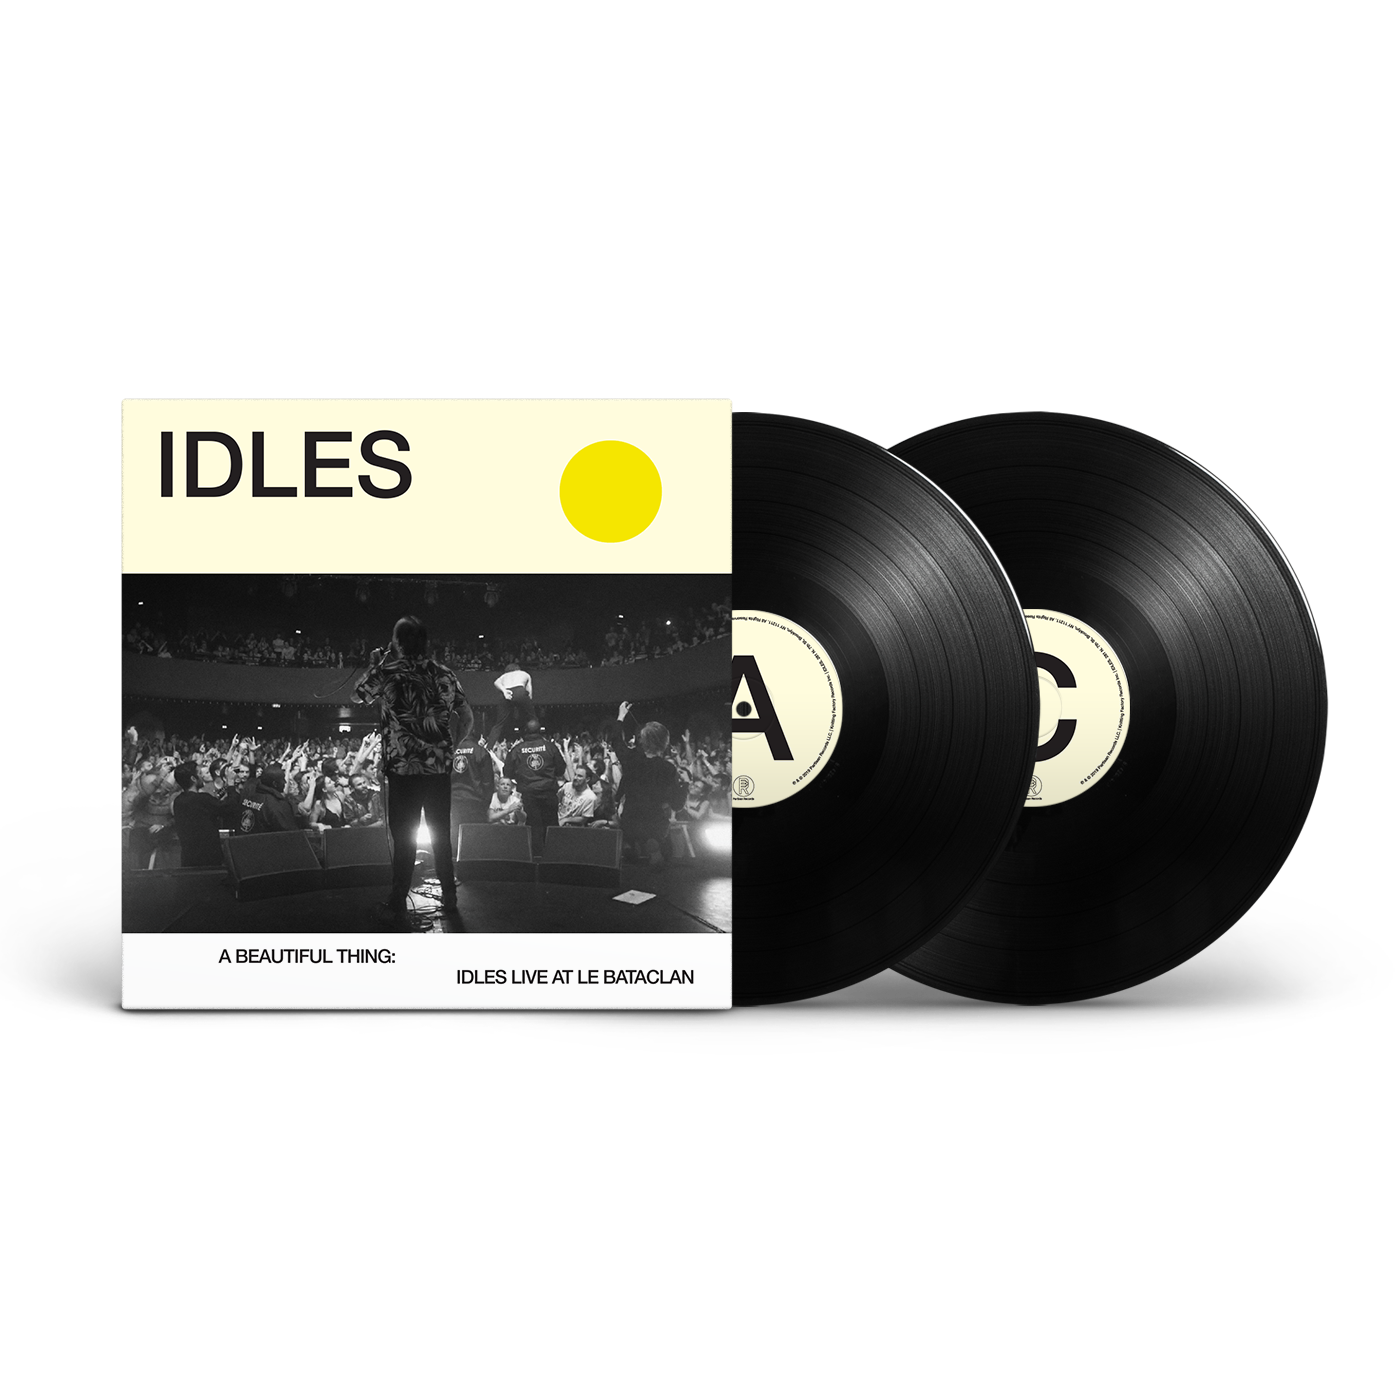 Idles Live At Le Bataclan/" 2xLP New Music Idles /"A Beautiful Thing